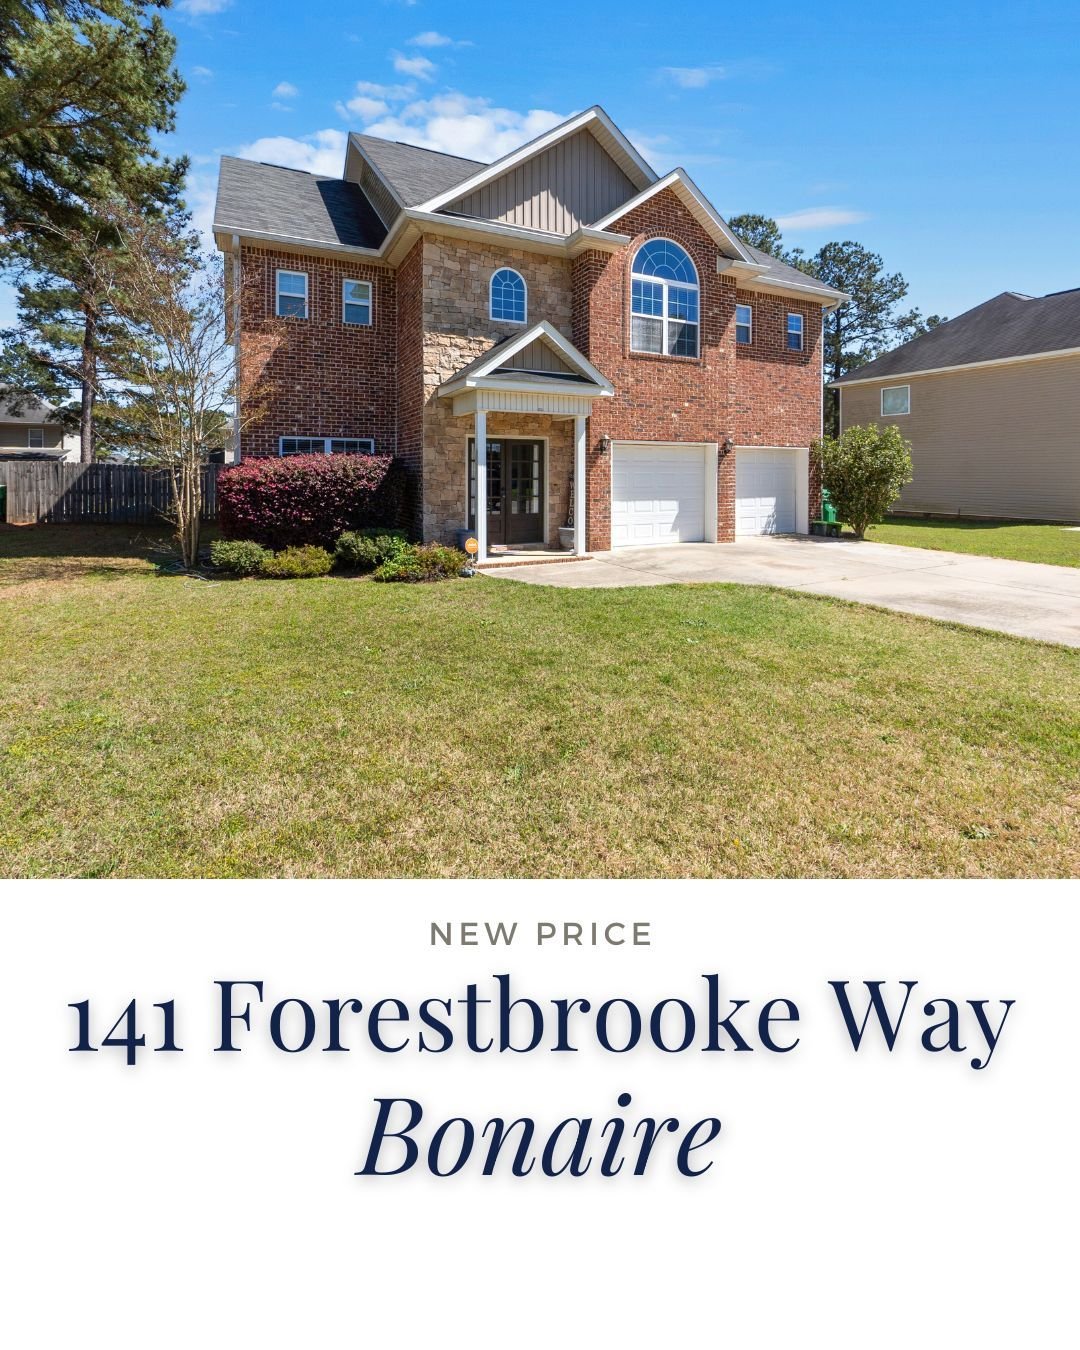 🏡Welcome to 141 Forestbrooke Way in Bonaire! New Price on this beautiful home--close to shopping, schools and Robins Air Force Base! For more information, photos, virtual tour and more, comment HOME and we'll send you a link to view details!

#middl